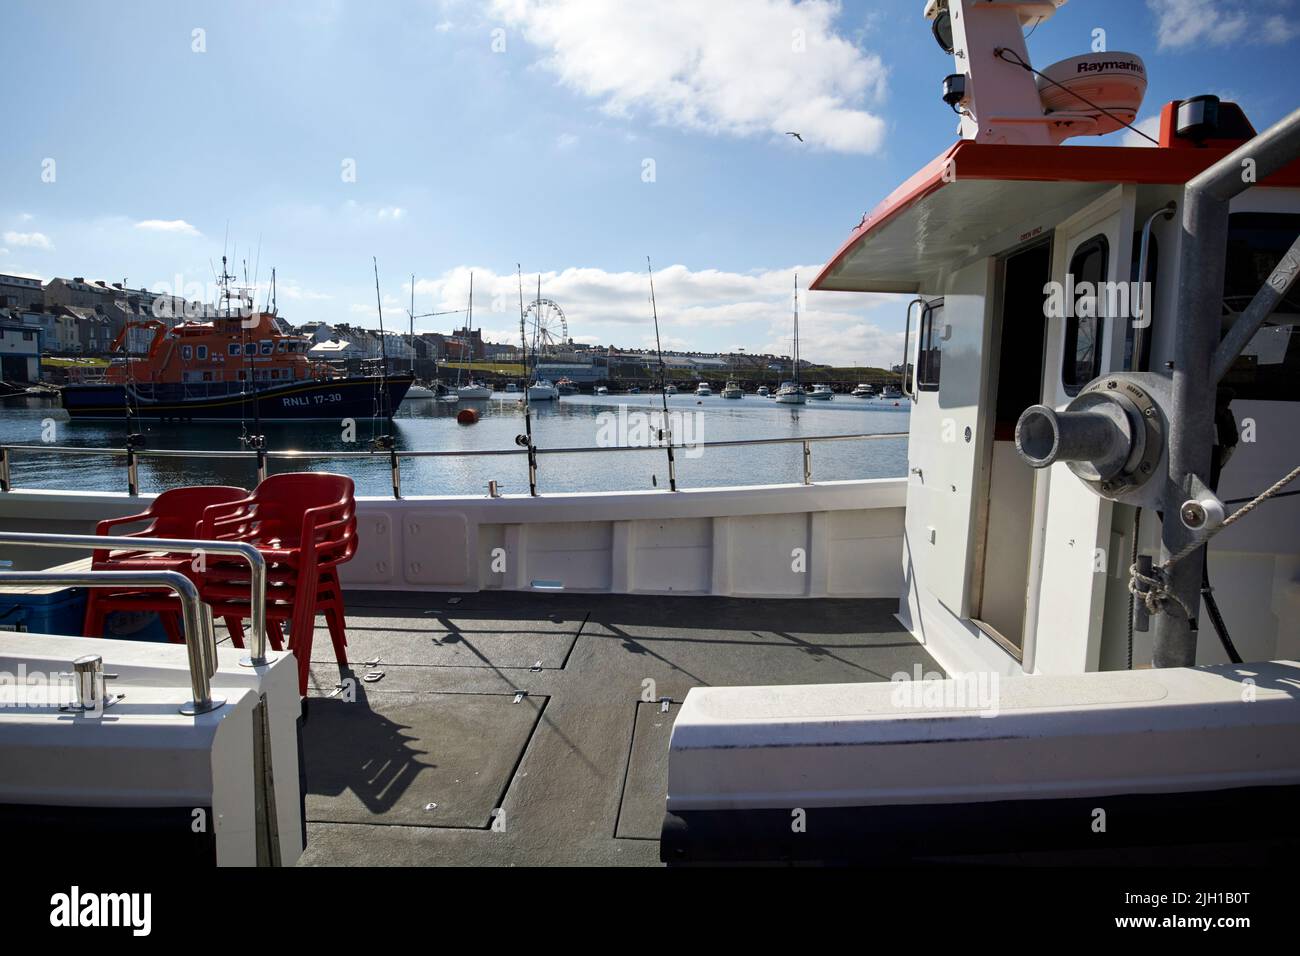 charter angling boat with disabled access at portrush harbour northern ireland uk Stock Photo